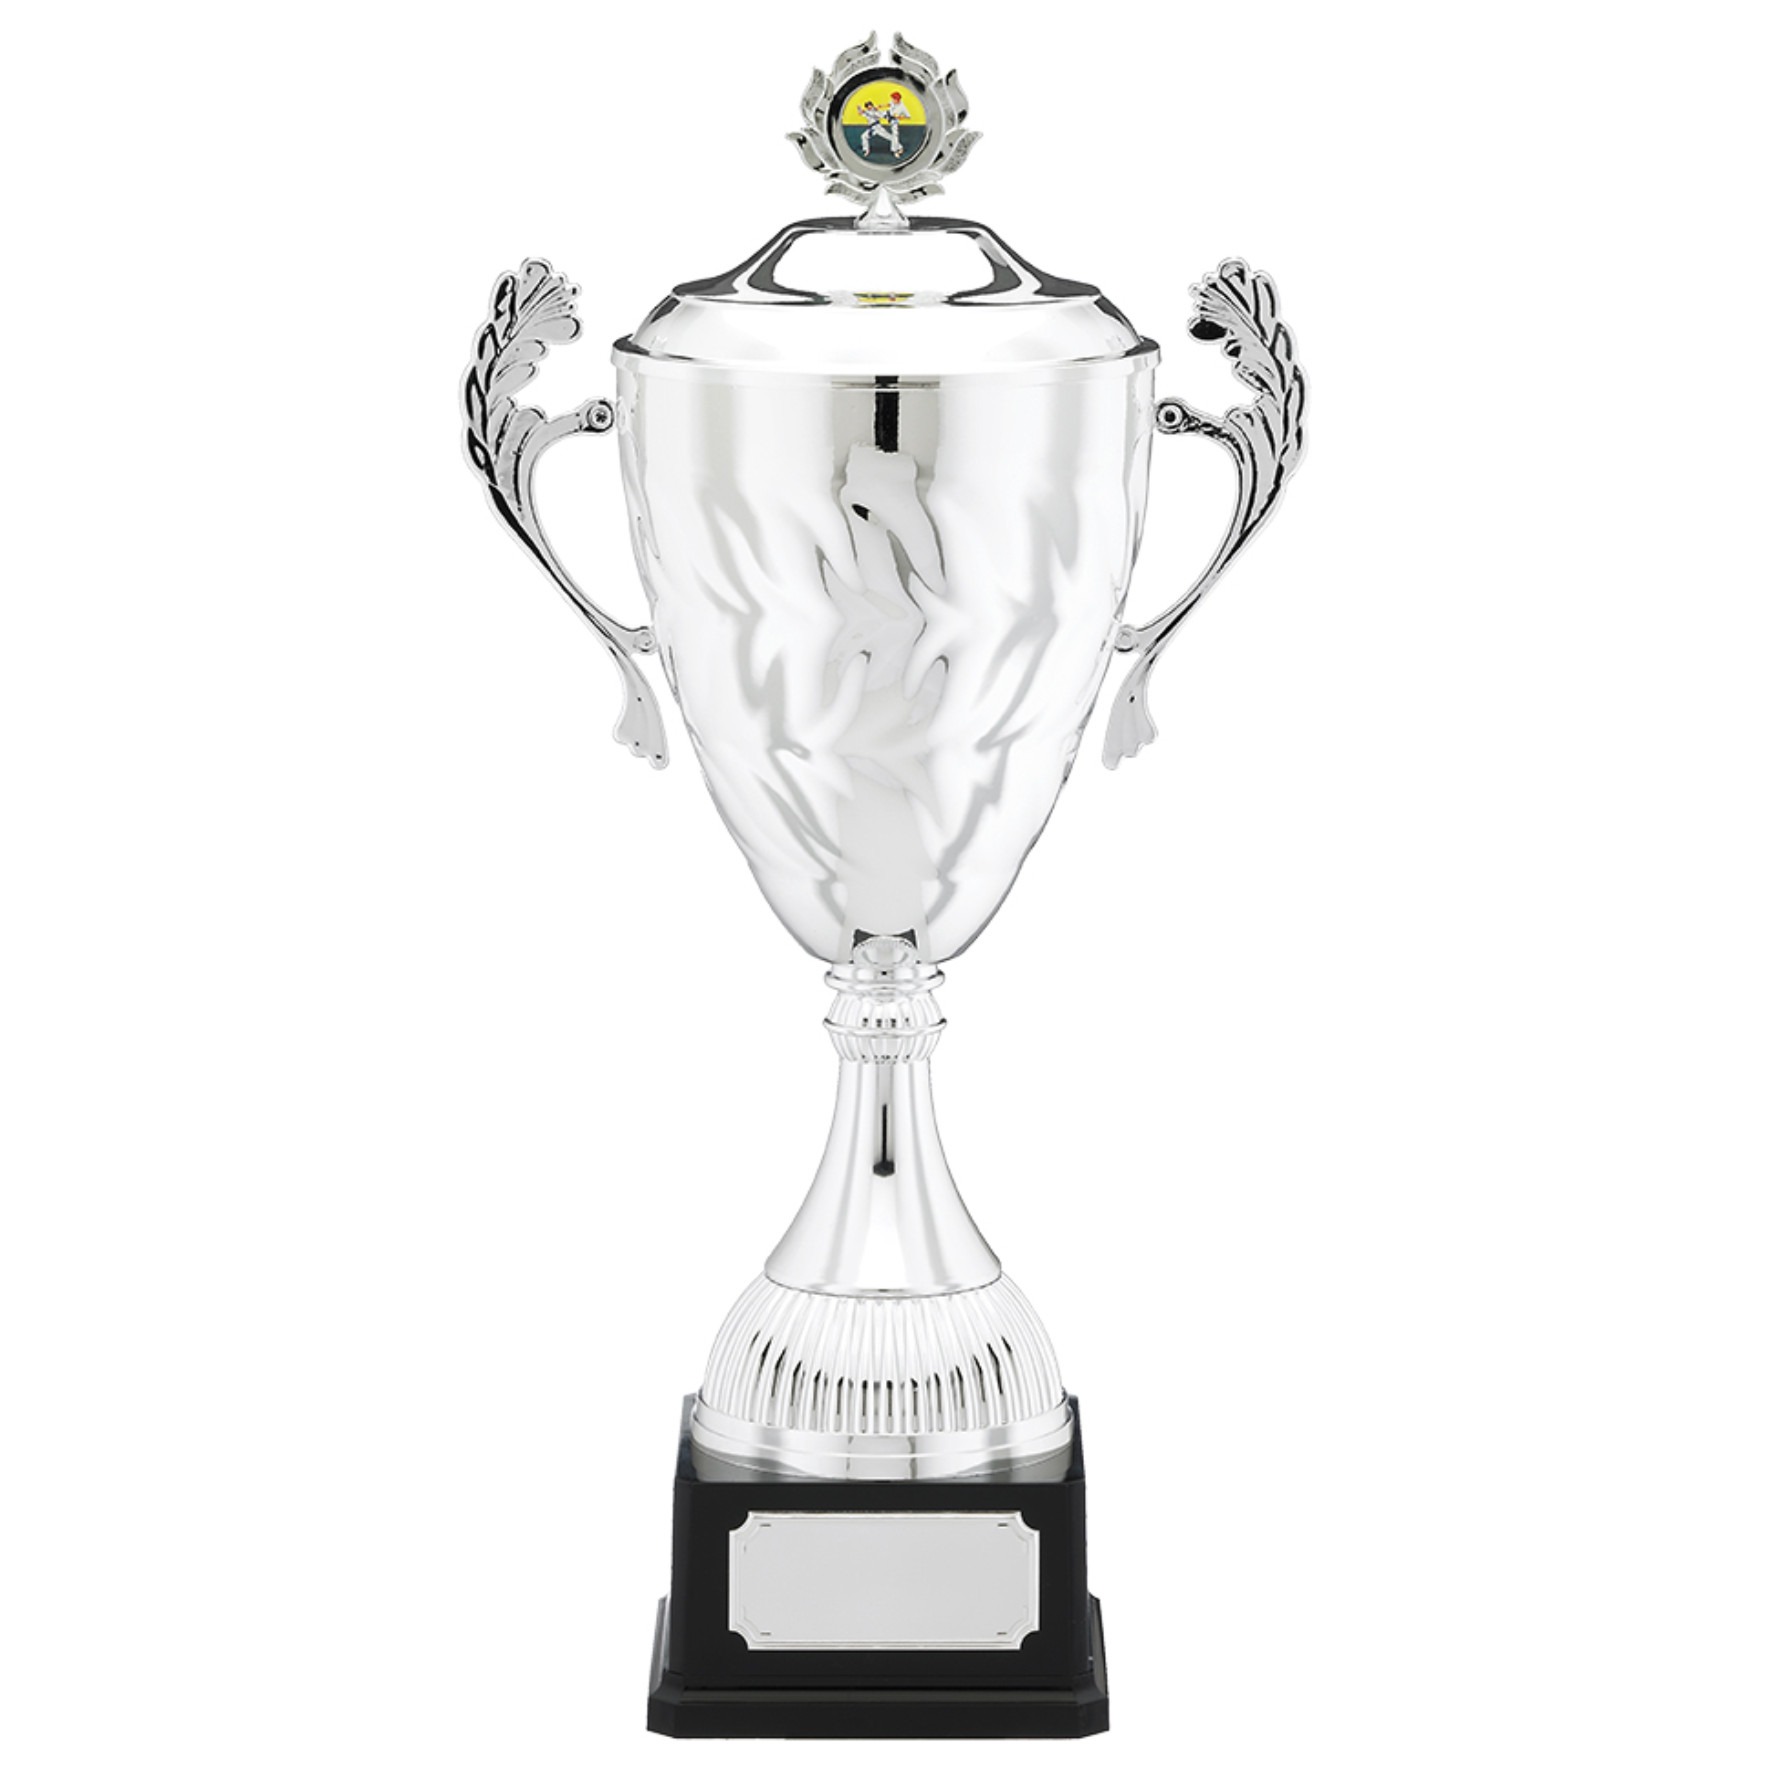 cl Silver Presentation Trophy Cup with Lid,200mm,FREE Engraving, 49//267E